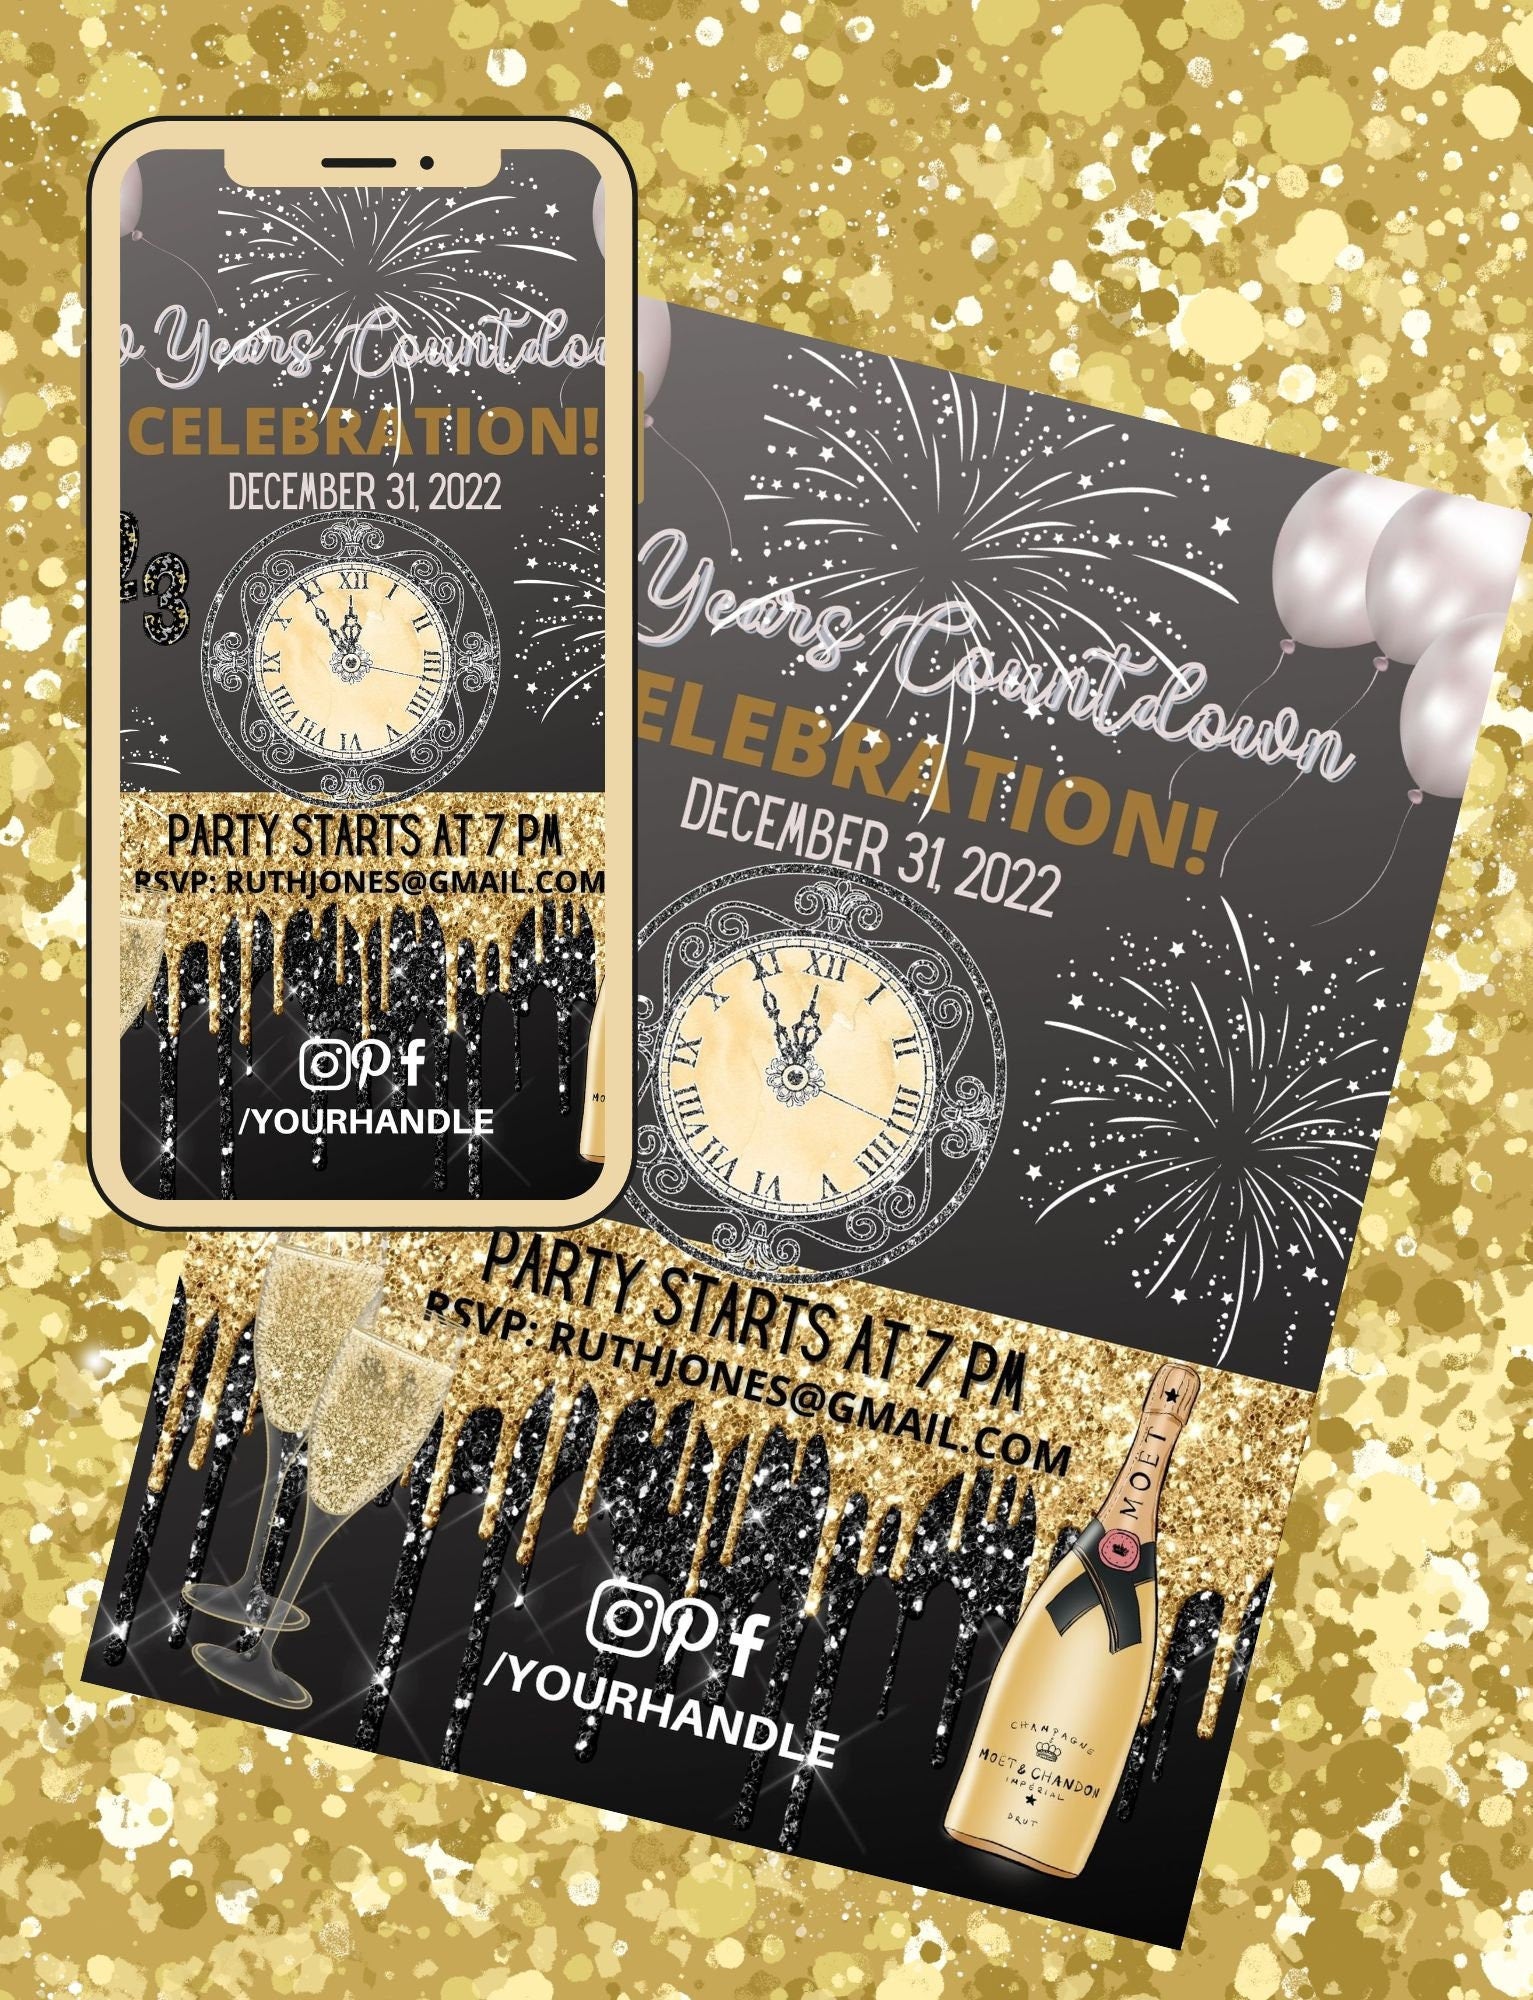 Animated MP4  New Years Virtual Invite Instagram, Social Media Post Digital E-Vite with sound Spaceship Countdown also Printable